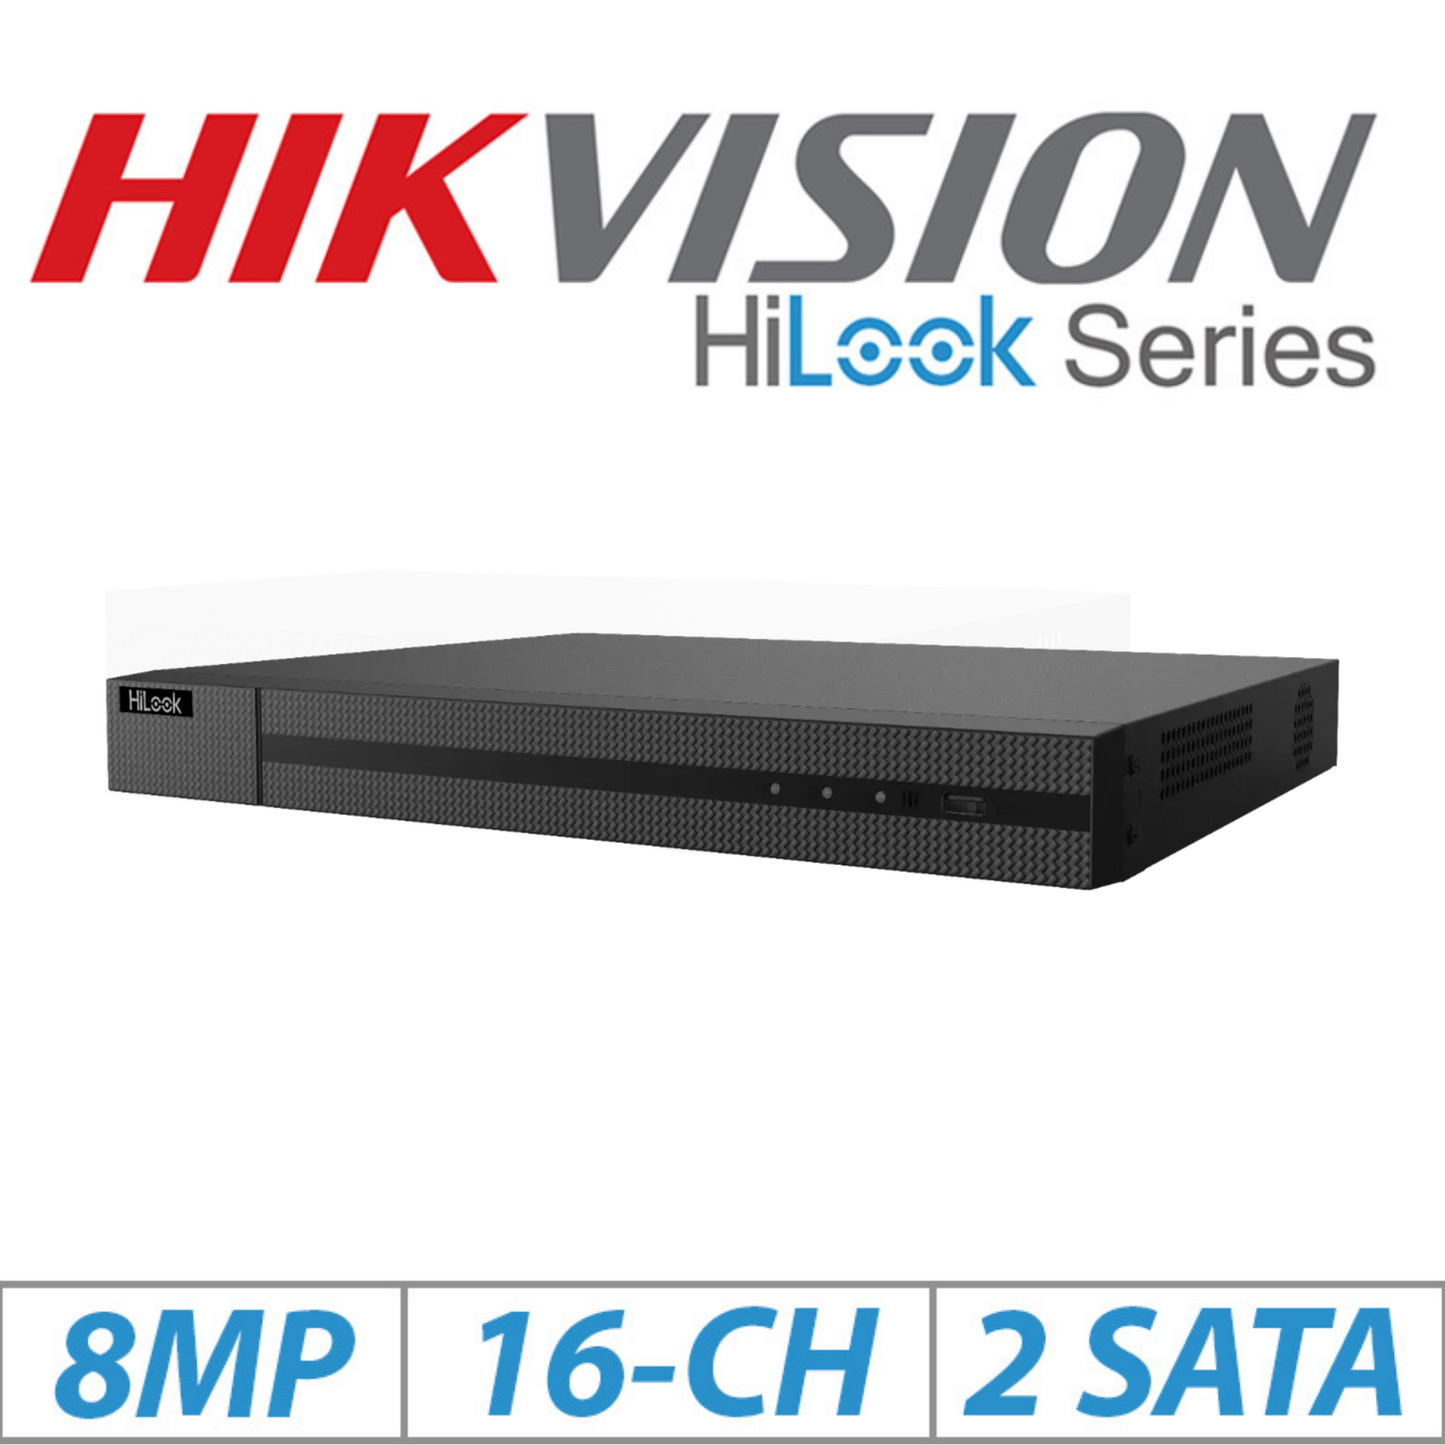 8mp 16ch Hikvision Hilook NVR PoE NVR-216MH-C-16P